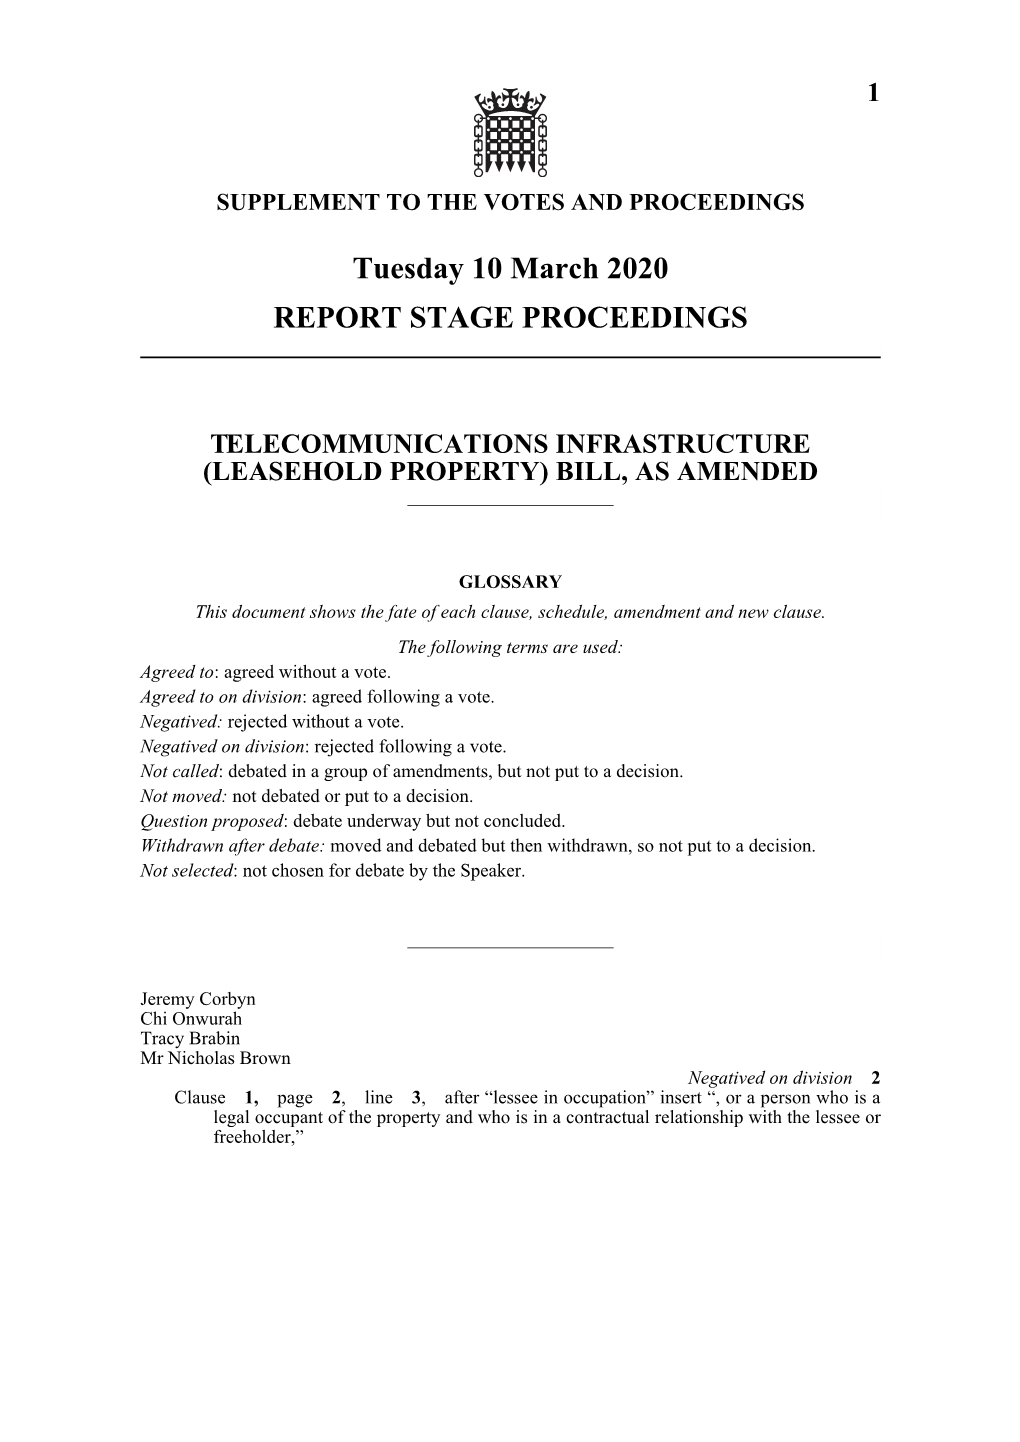 Report Stage Proceedings Template.Fm